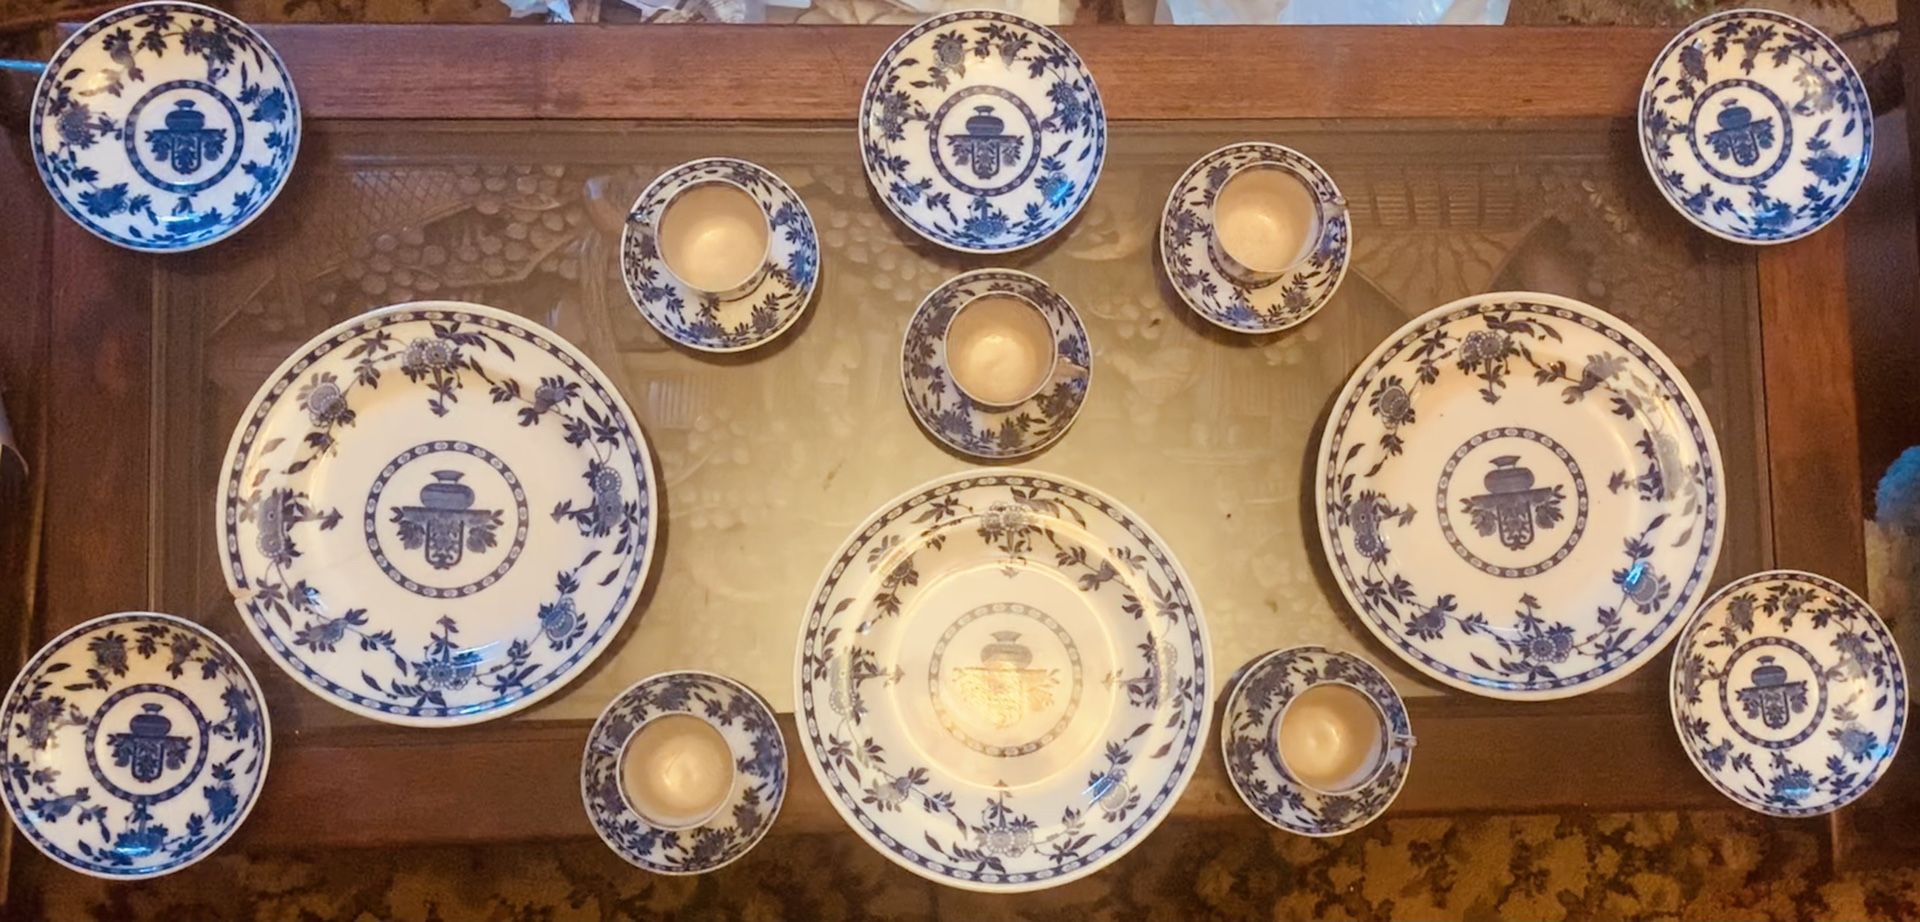 Minton Delft Pottery Set From 1800s